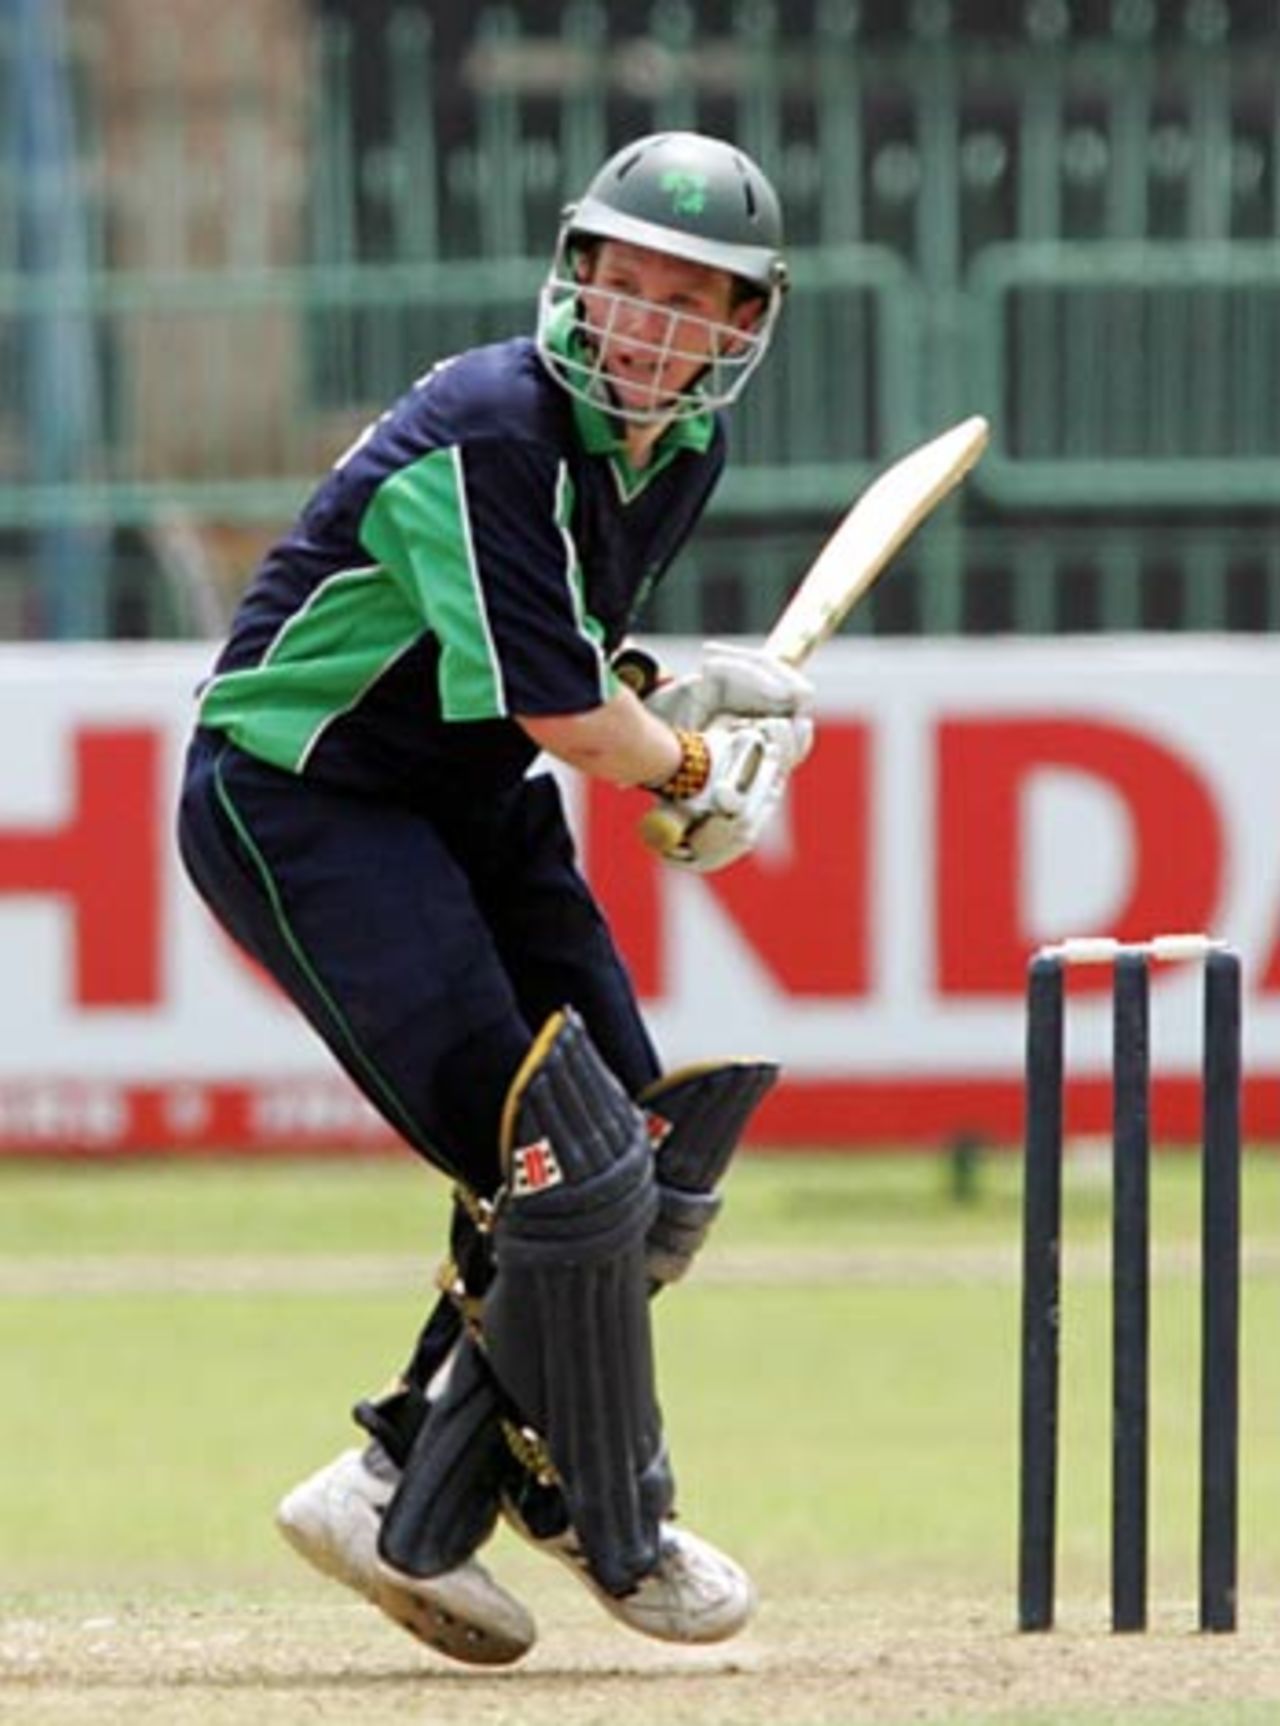 Eoin Morgan skips down the pitch during his magnificent hundred against New Zealand, New Zealand Under-19s v Ireland Under-19s, Under-19 World Cup, Sri Lanka, February 14, 2006